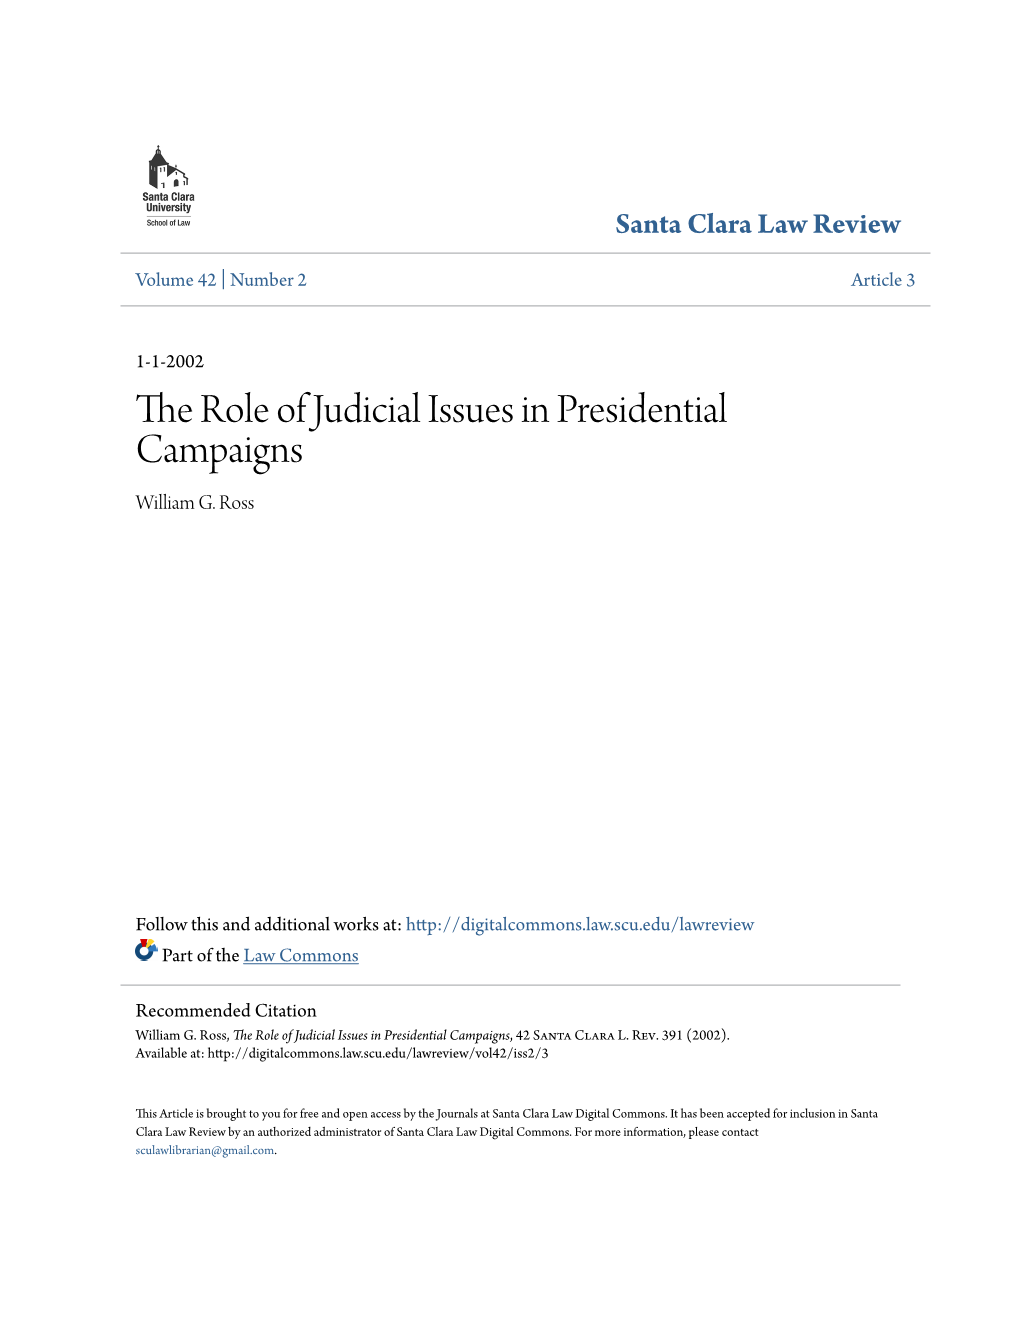 The Role of Judicial Issues in Presidential Campaigns William G